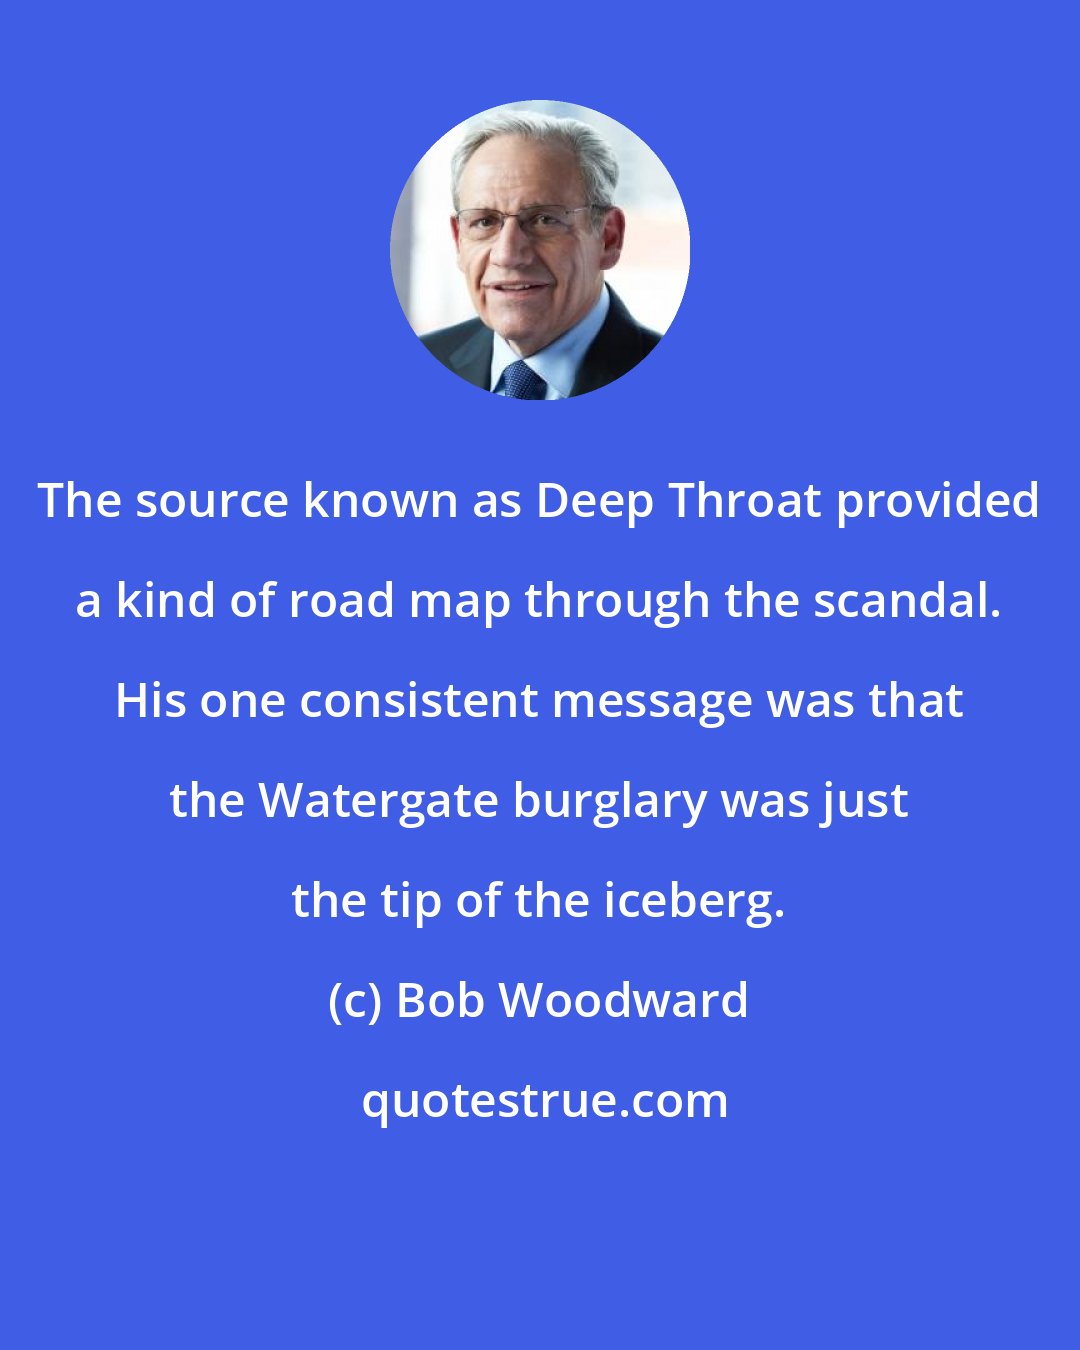 Bob Woodward: The source known as Deep Throat provided a kind of road map through the scandal. His one consistent message was that the Watergate burglary was just the tip of the iceberg.